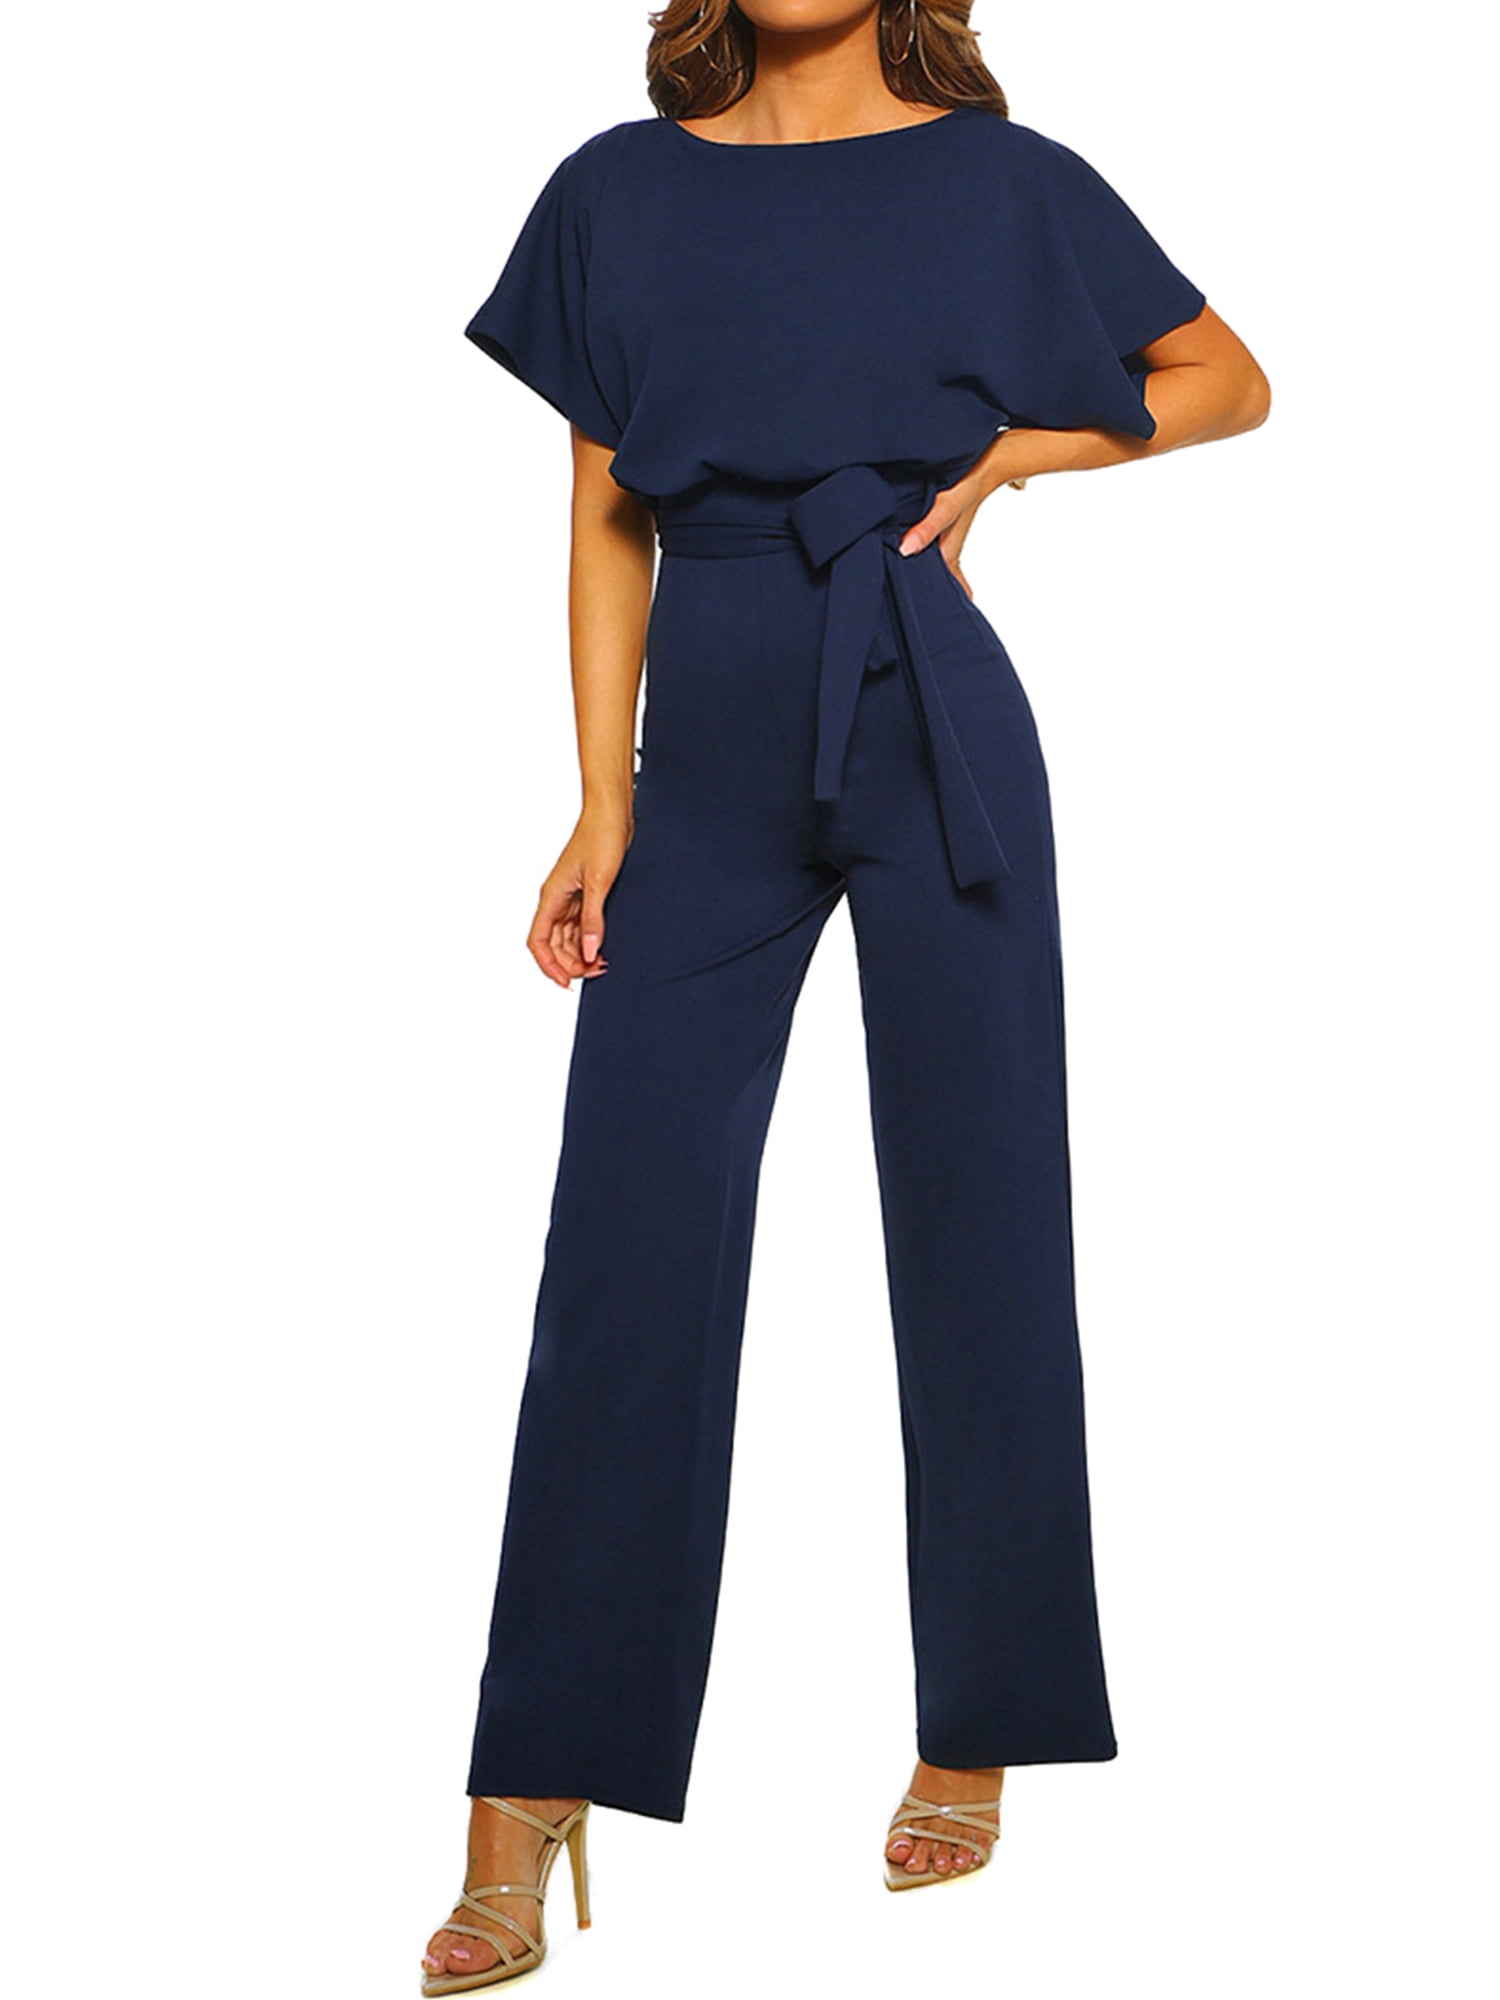 WAo Womens Short Sleeve Jumpsuit Solid Color Belted Playsuit Wide Leg Pants Elegant Rompers Casual Jumpsuits with Belt